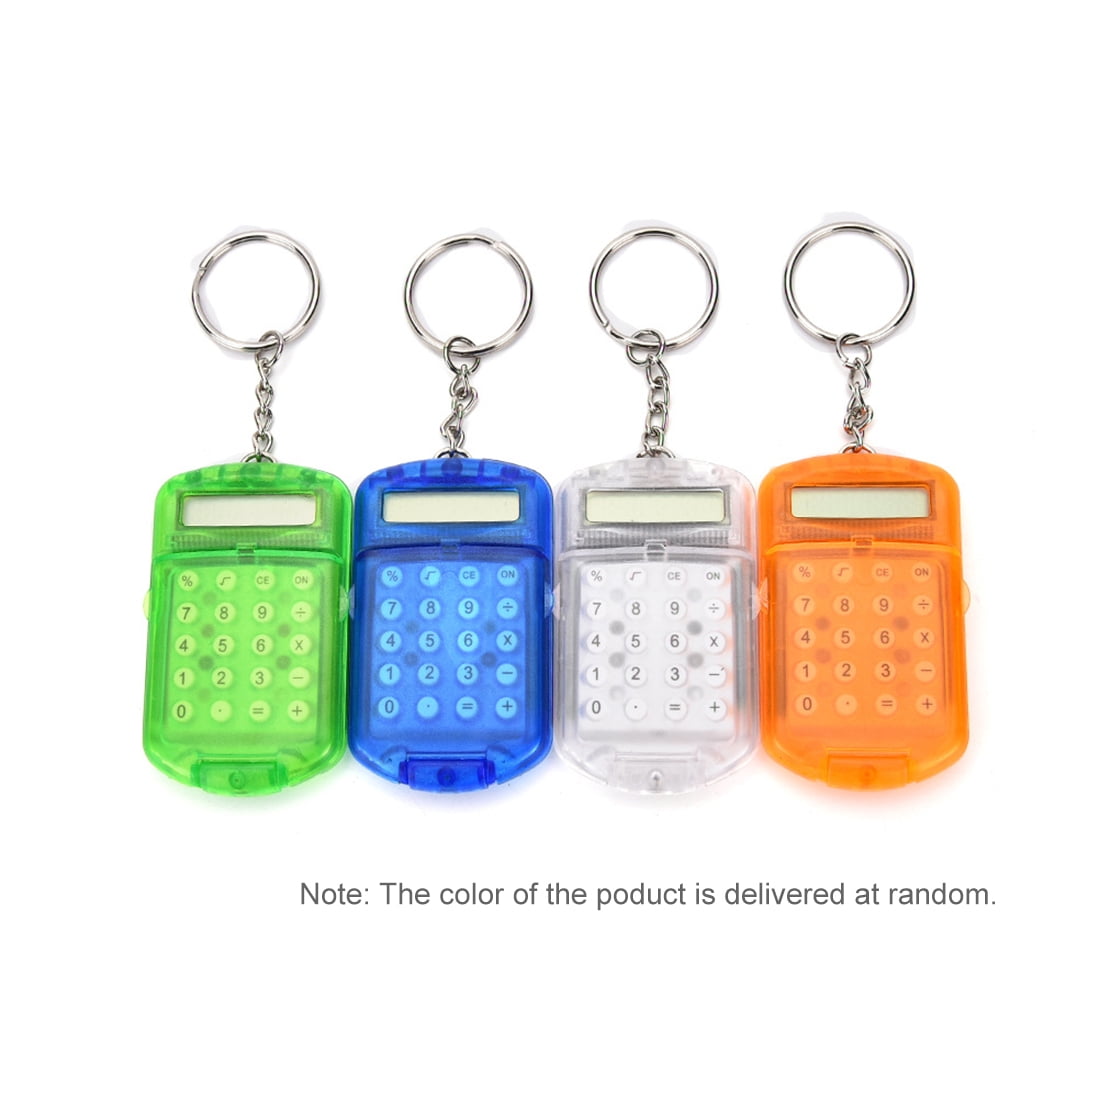 NUOBESTY Calculators Portable Key Ring Portable Electronic Calculator Mini Calculator Electronic Calculator for Kids Students School Home 3pcs